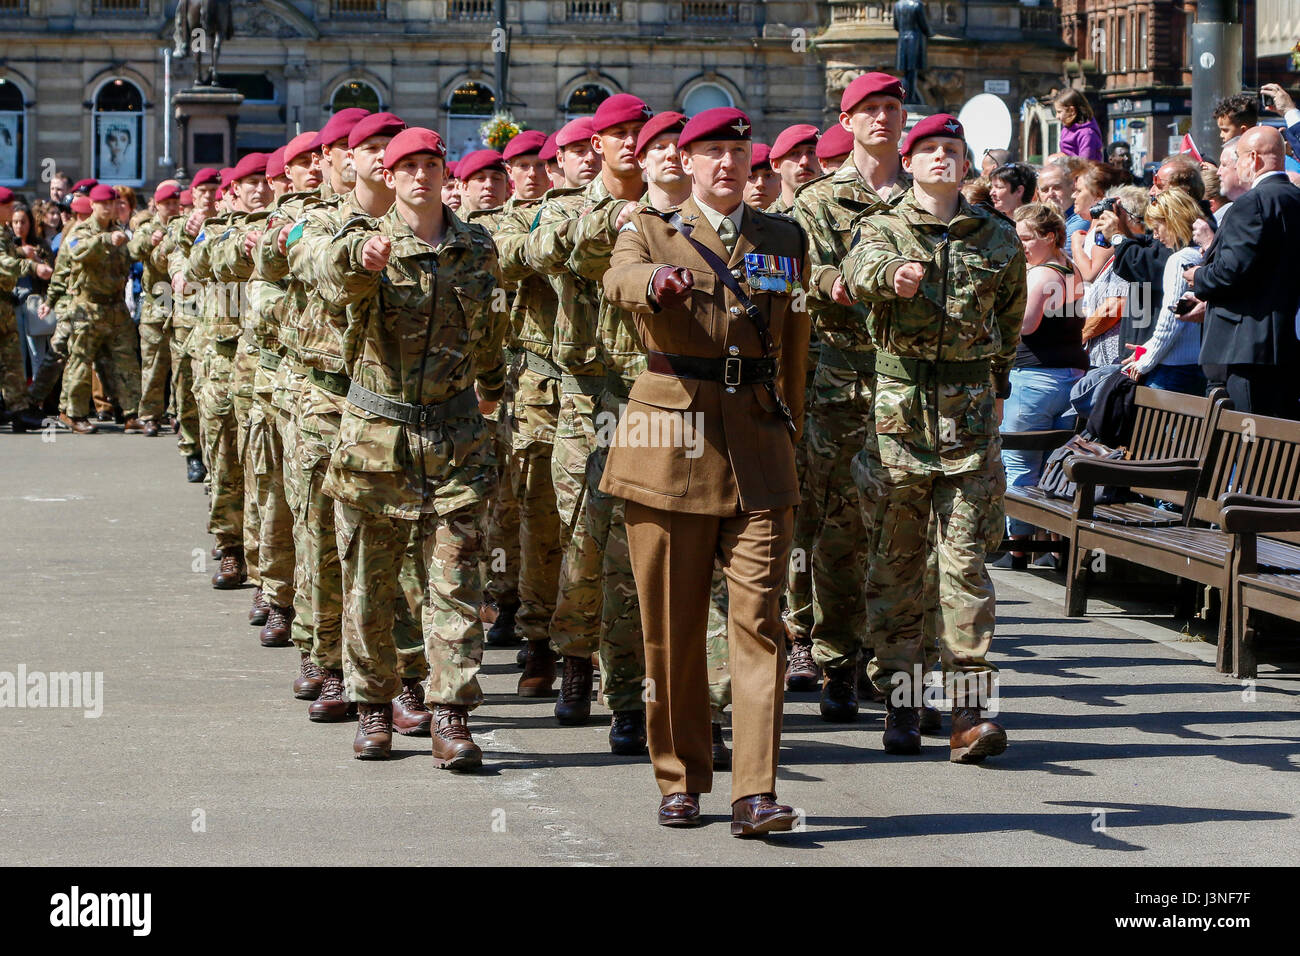 Glasgow, Scotland, UK. 6th May, 2017. To commemorate the 70th anniversary of the forming of XV (Scottish Volunteer) battalion of the Parachute Regiment, later to be known as '4 Para', a service was held at Glasgow cathedral followed by a march through the city, led by the Parachute Regiments mascot, a Shetland pony called Pegasus. The march finished in George Square where there as a march past and salute followed by an address by Lt Colonel Pat Conn OBE. Credit: Findlay/Alamy Live News Stock Photo